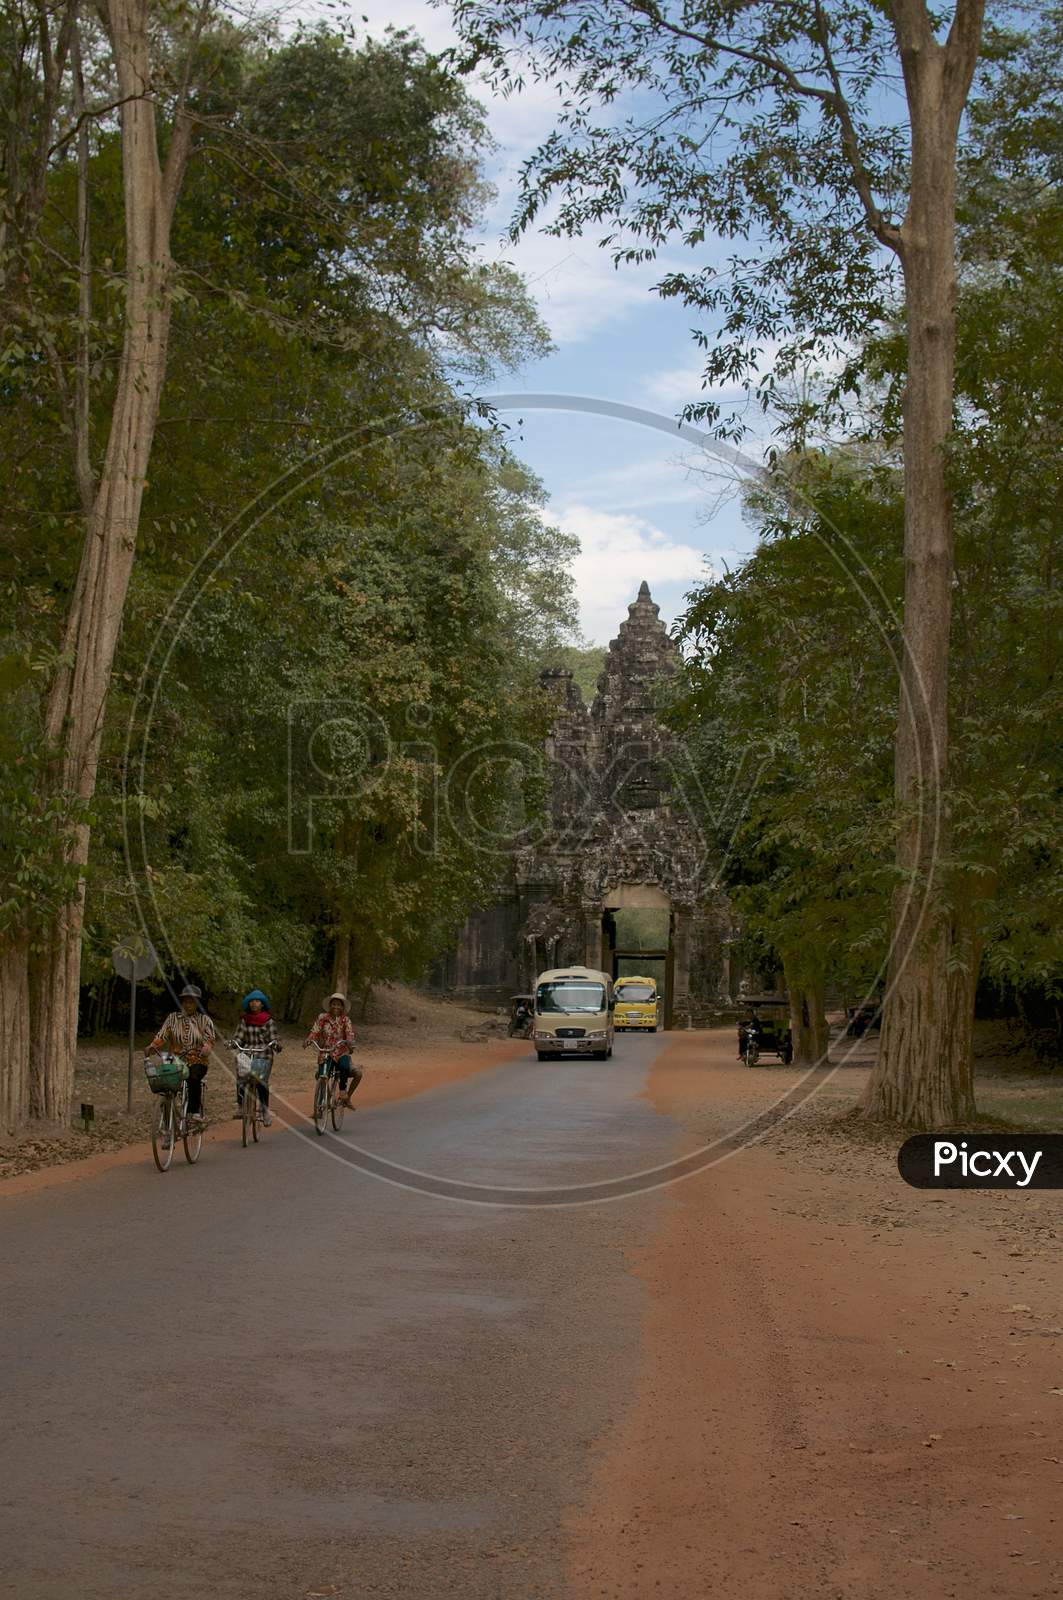 Street View Of Bayon Temple Entrance Gate In Cambodia